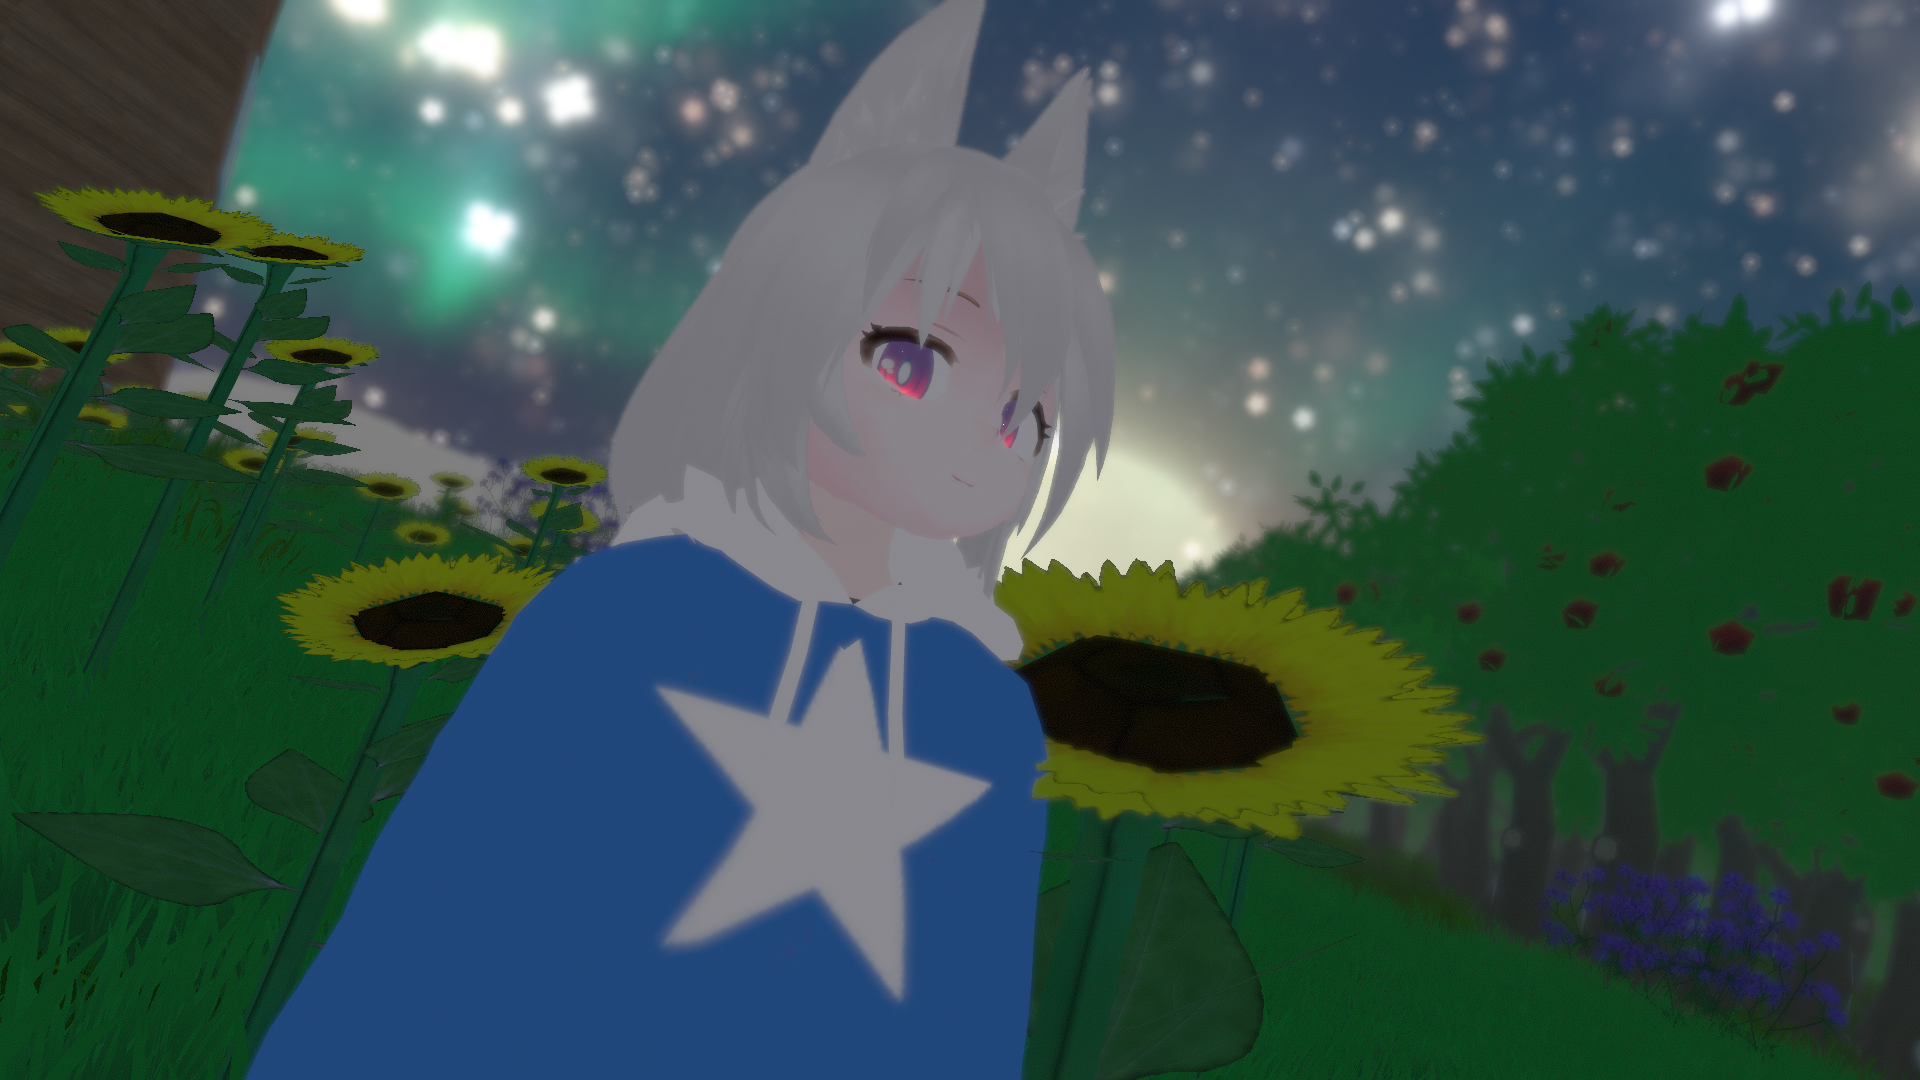 Me at VRChat (Photoed by my friend Natsume)